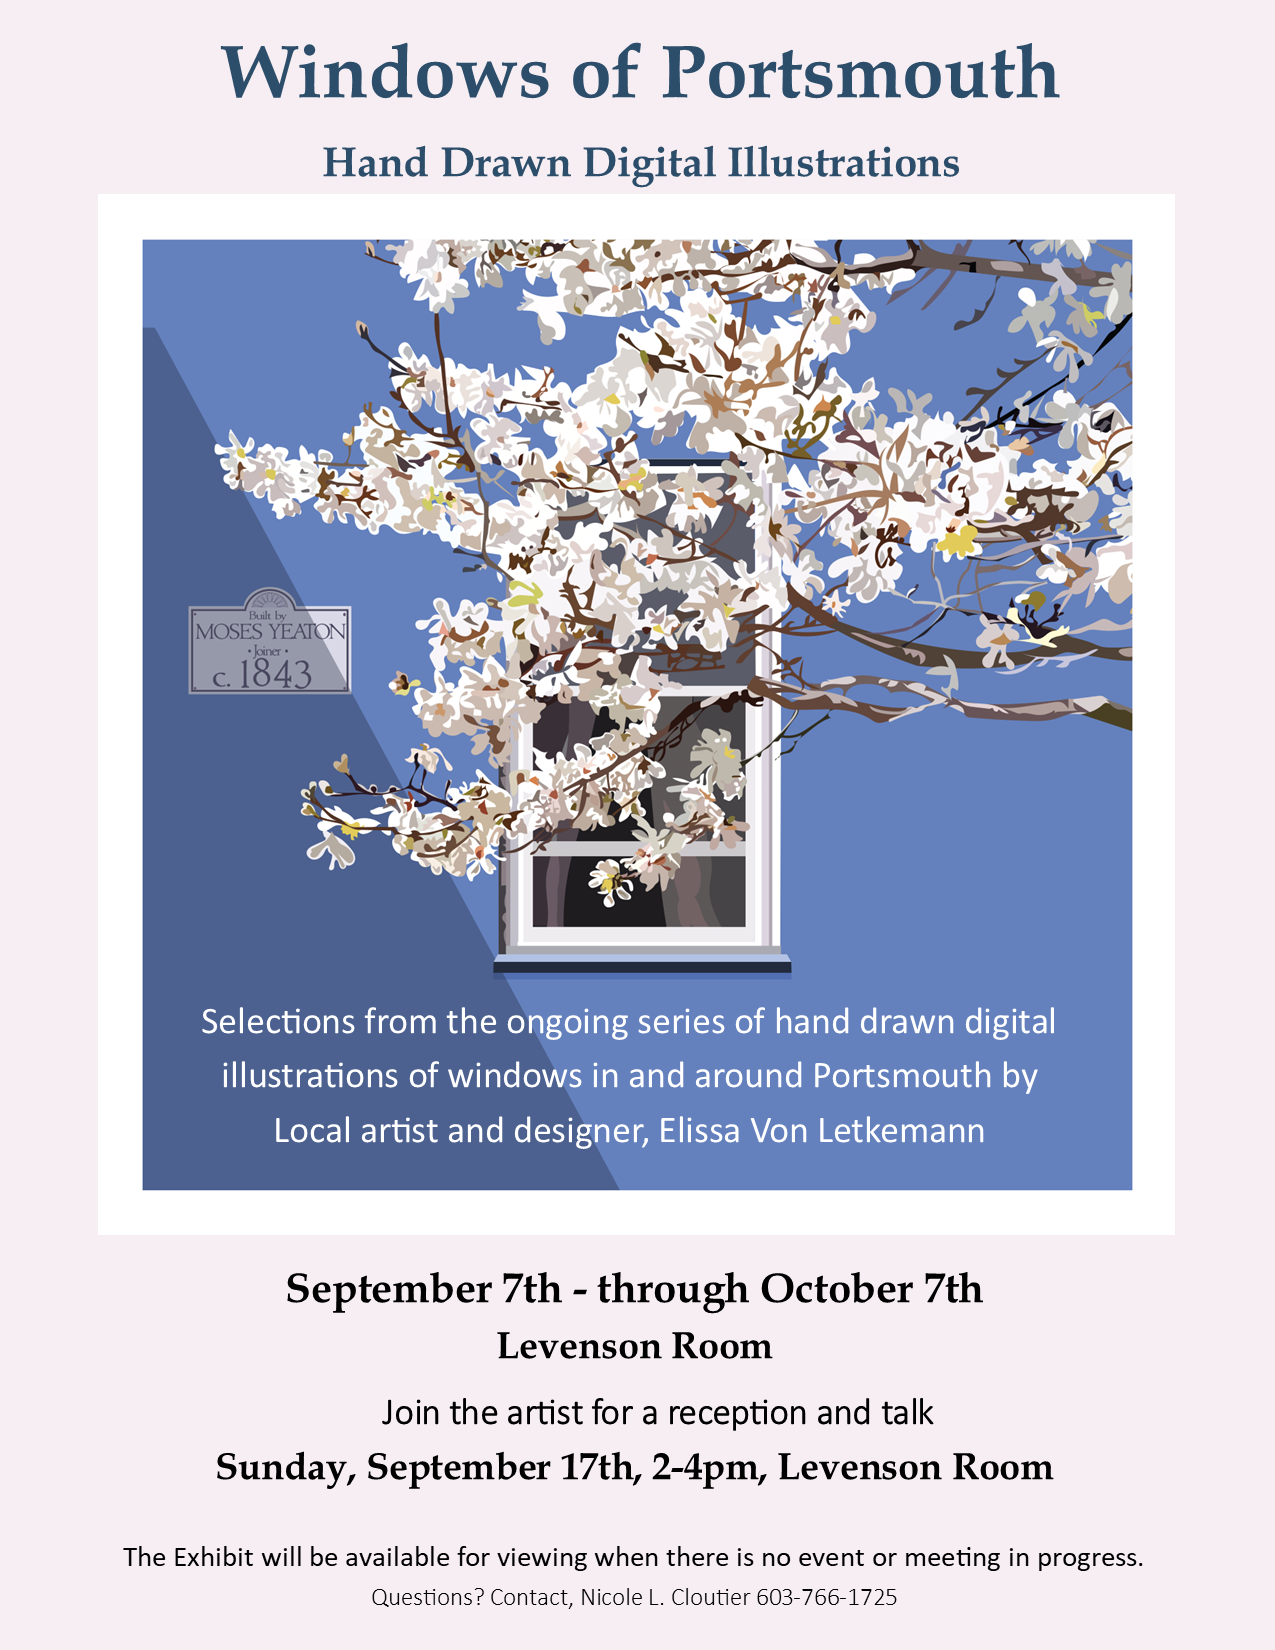 Windows of Portsmouth exhibit poster with window and tree 